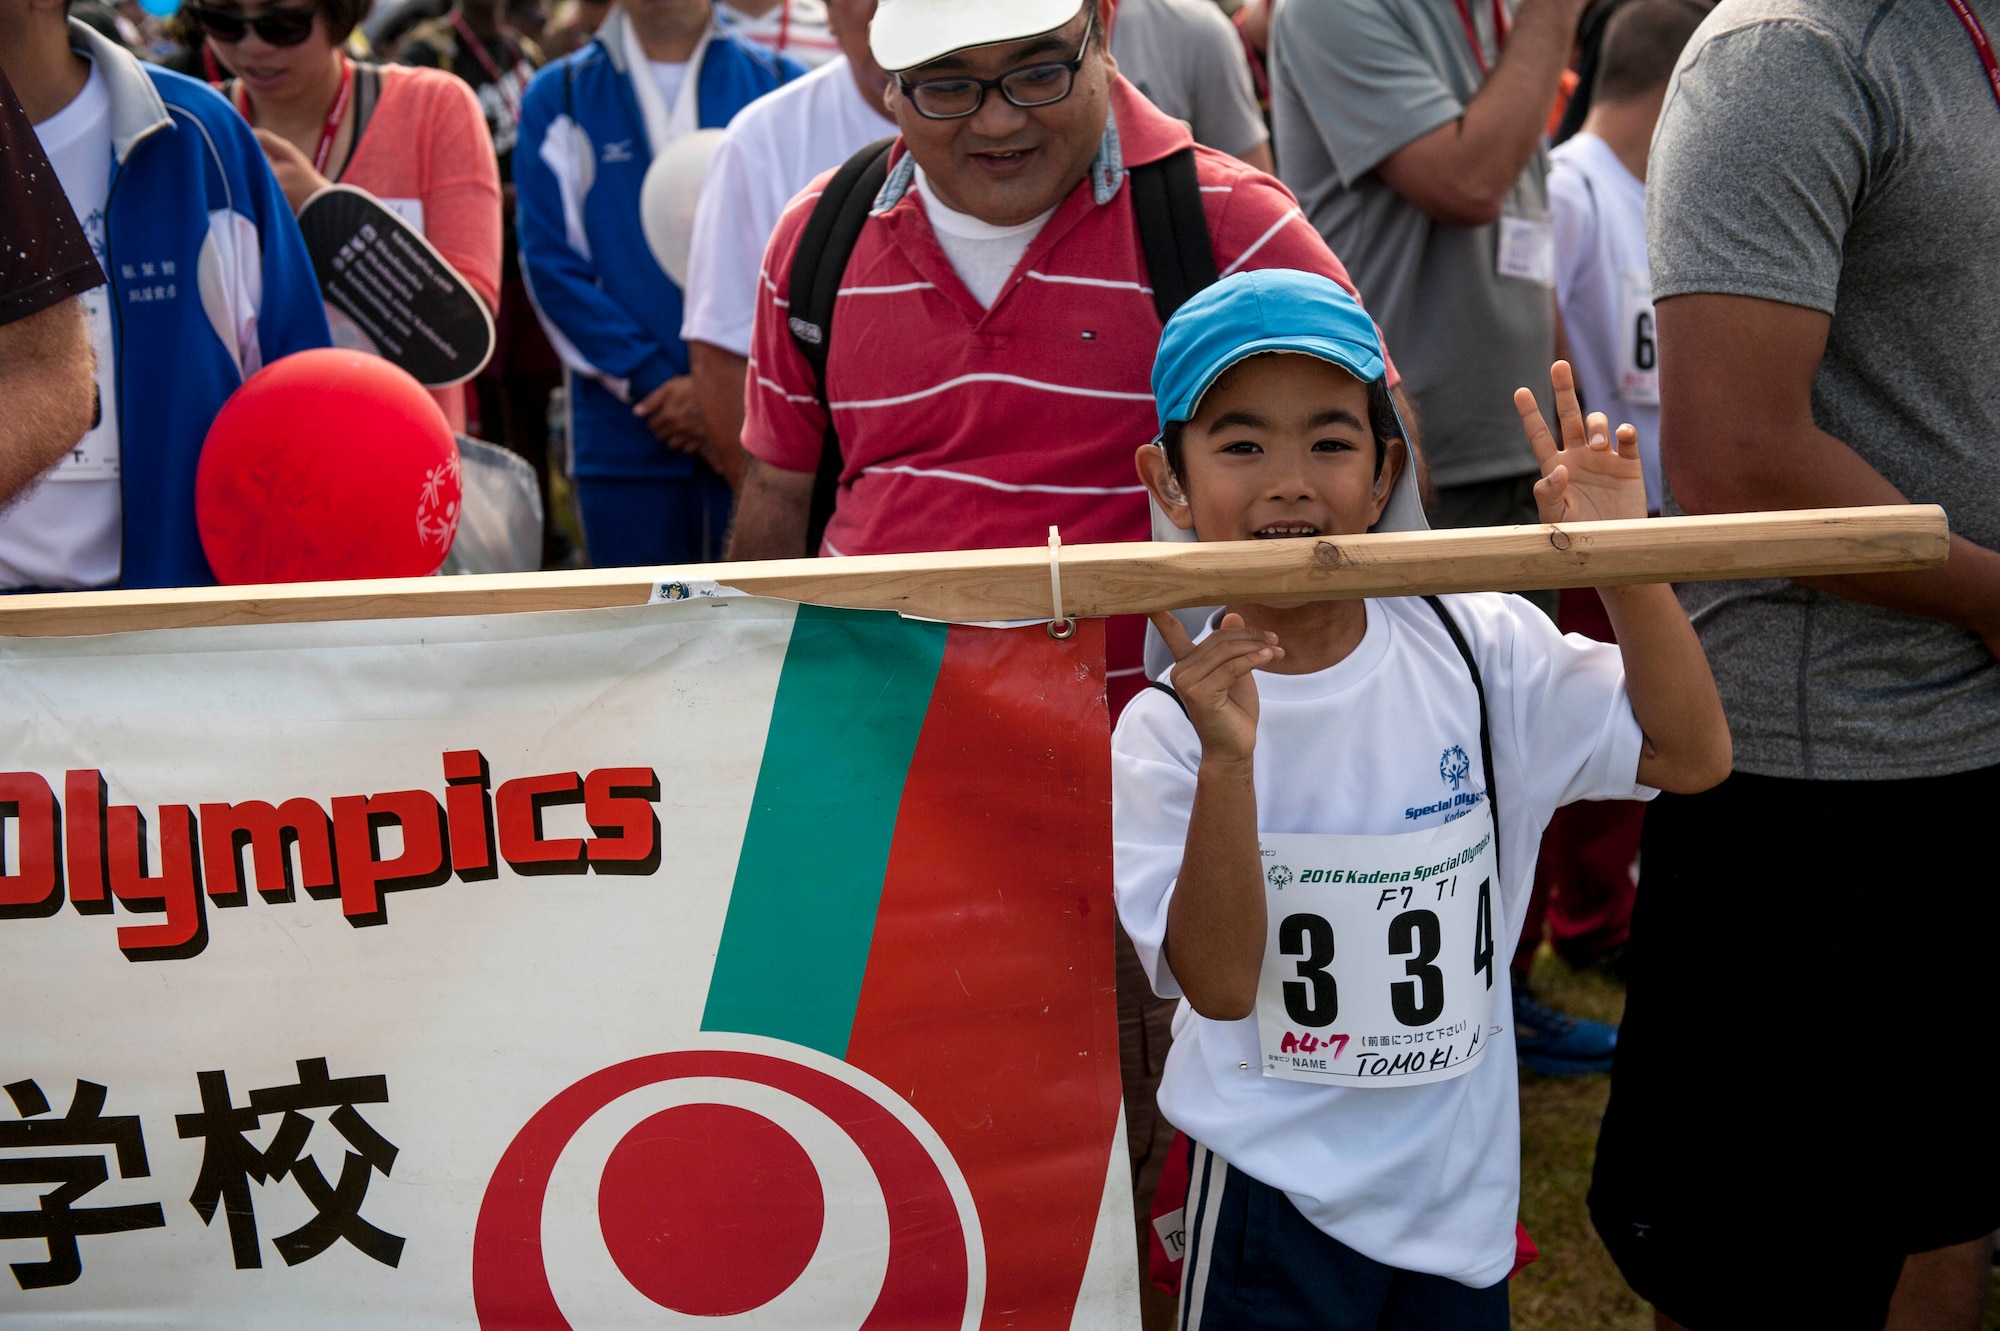 Tomoki, a special-needs athlete, holds up his school sign for a parade formation during the Kadena Special Olympics opening ceremony Nov. 5, 2016, at Kadena Air Base, Japan. The KSO breaks down social barriers and creates an environment of understanding and acceptance for the members of the combined community with physical and intellectual disabilities. (U.S. Air Force photo by Senior Airman Peter Reft/Released)